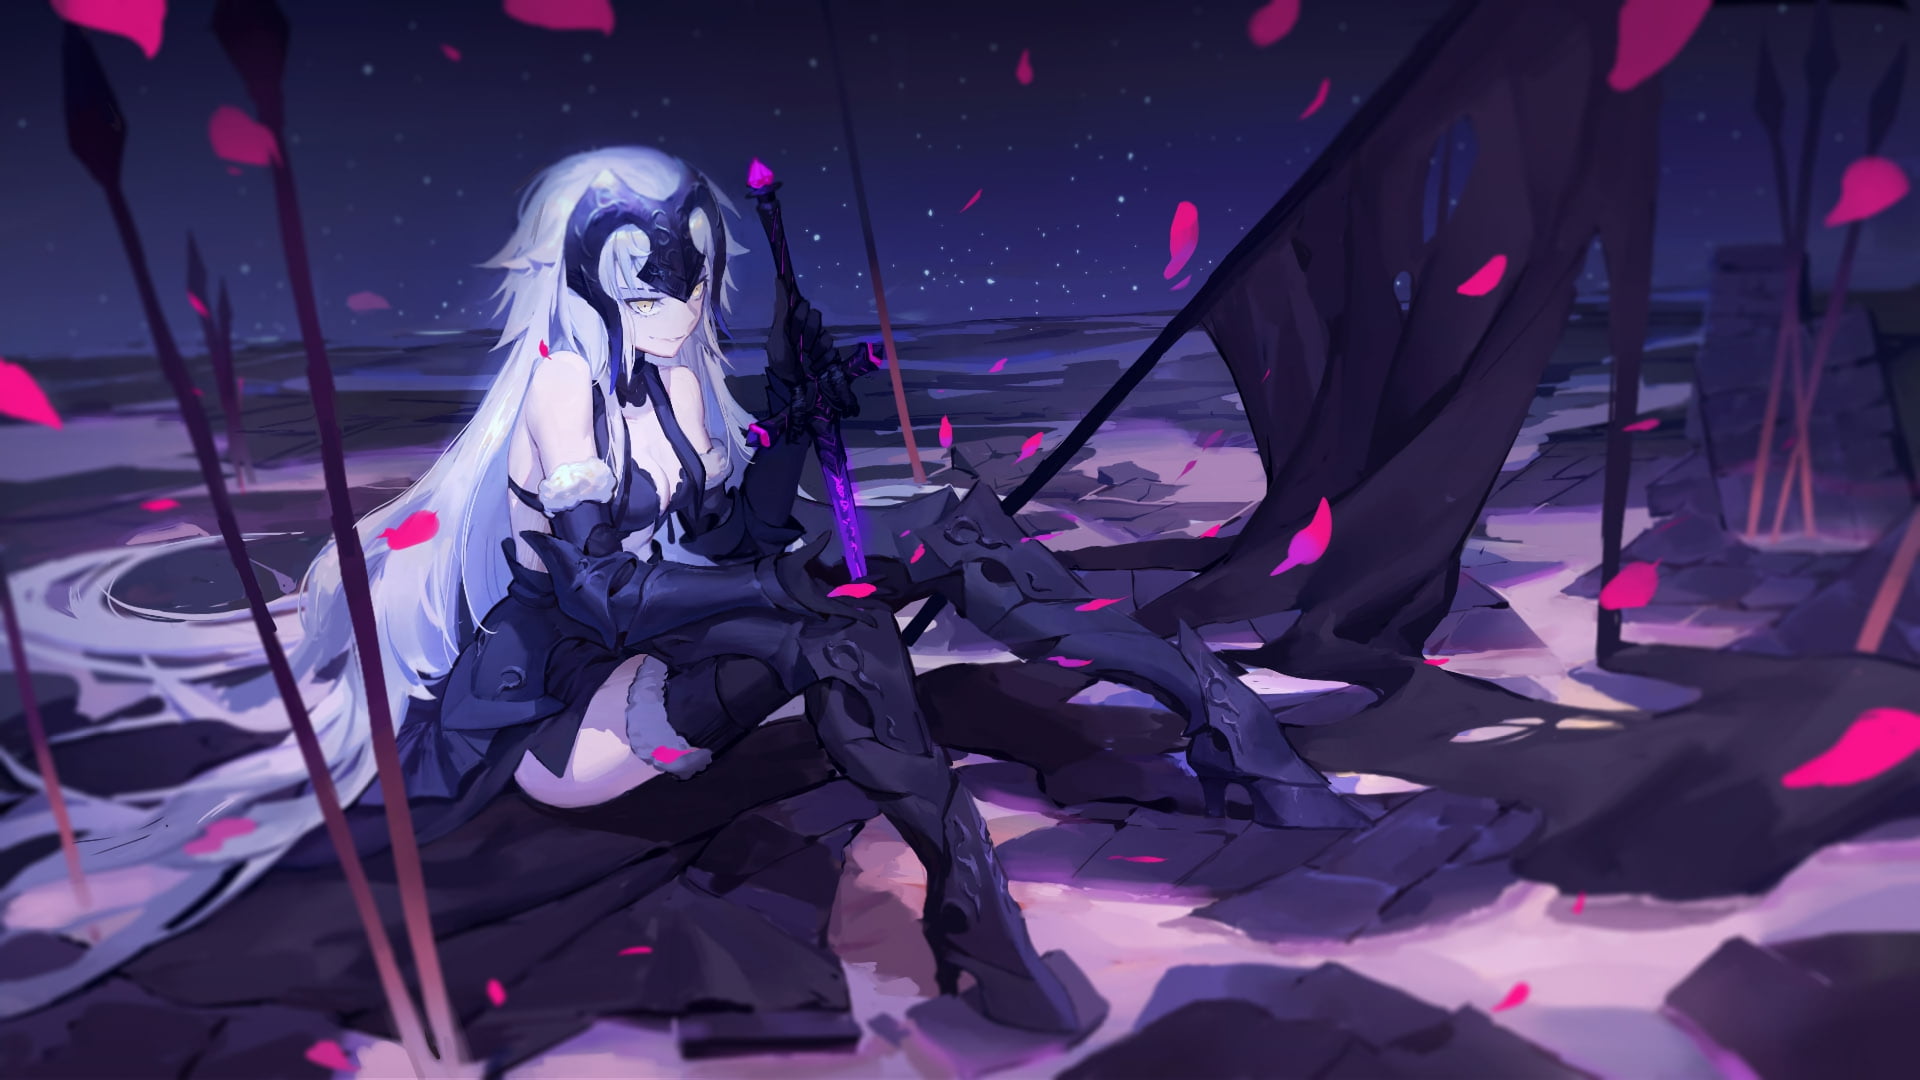 white haired female anime character, Fate/Grand Order, Jeanne d'arc alter